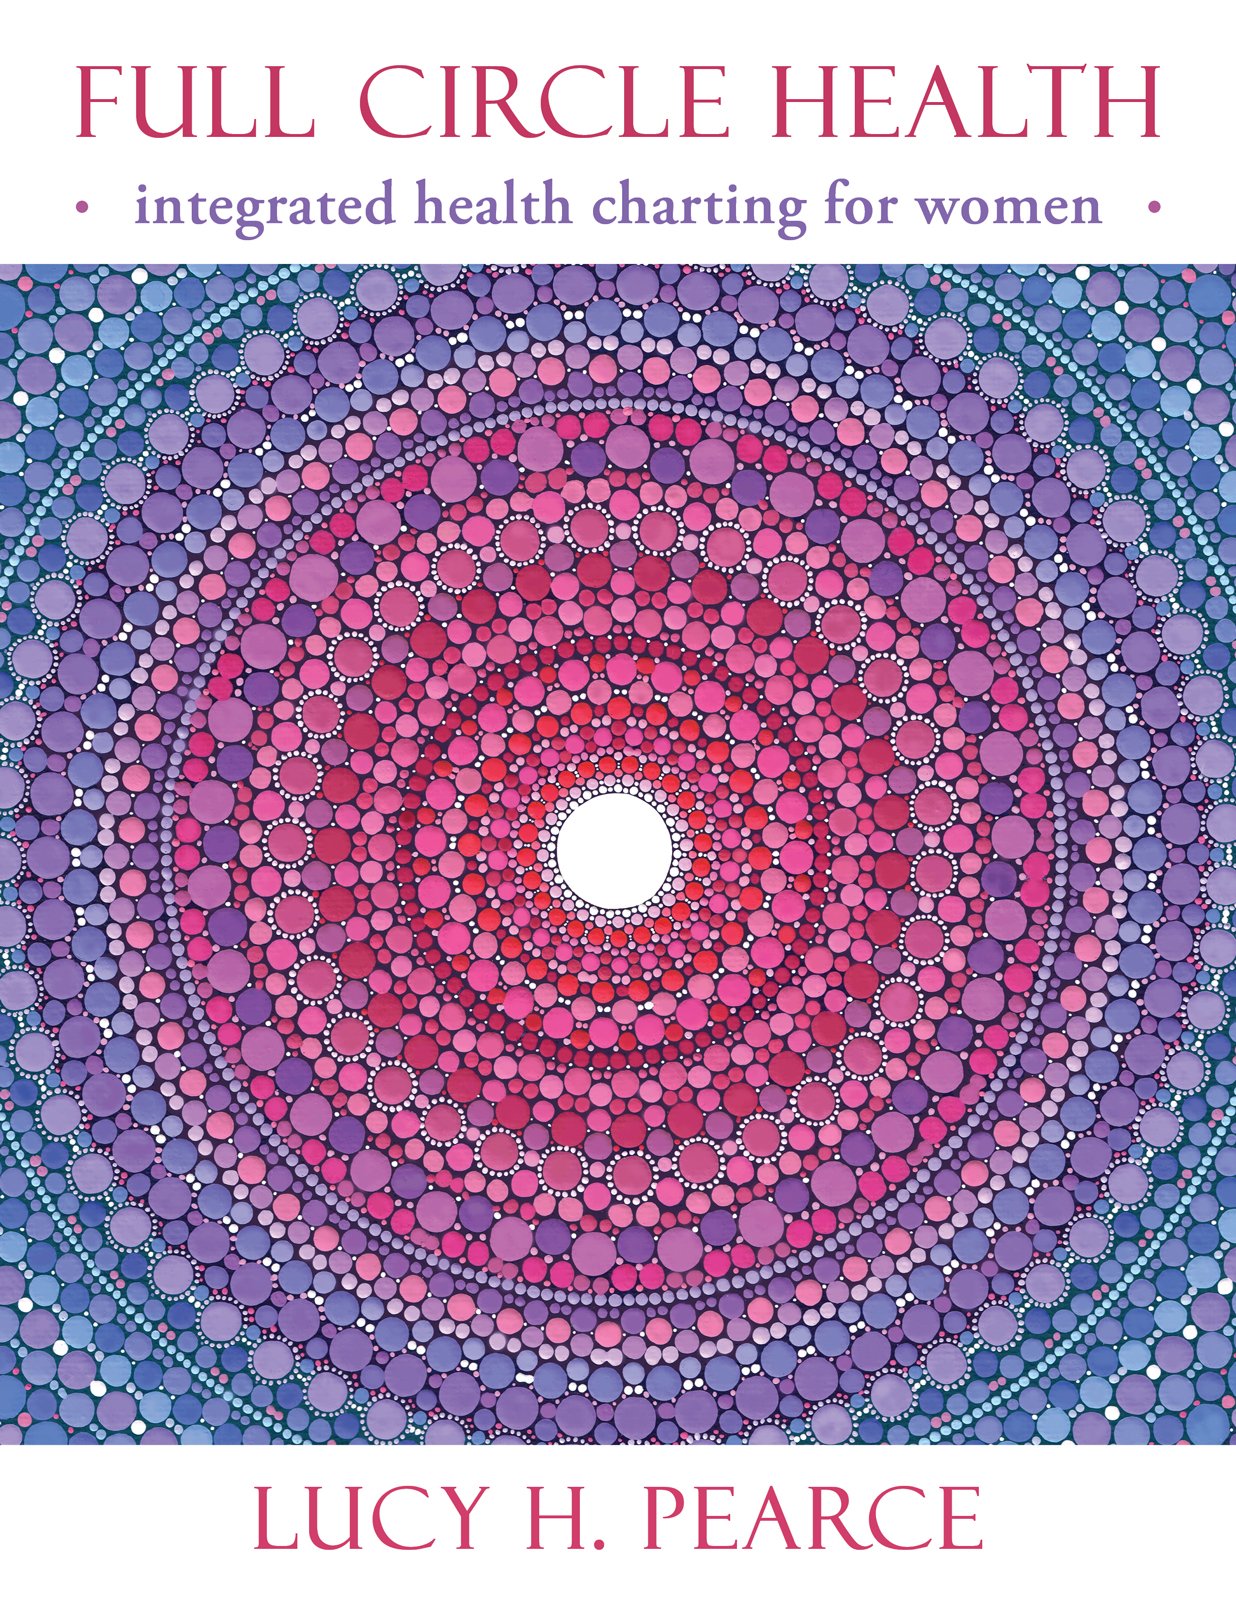 Full Circle Health by Lucy H. Pearce, Womancraft Publishing